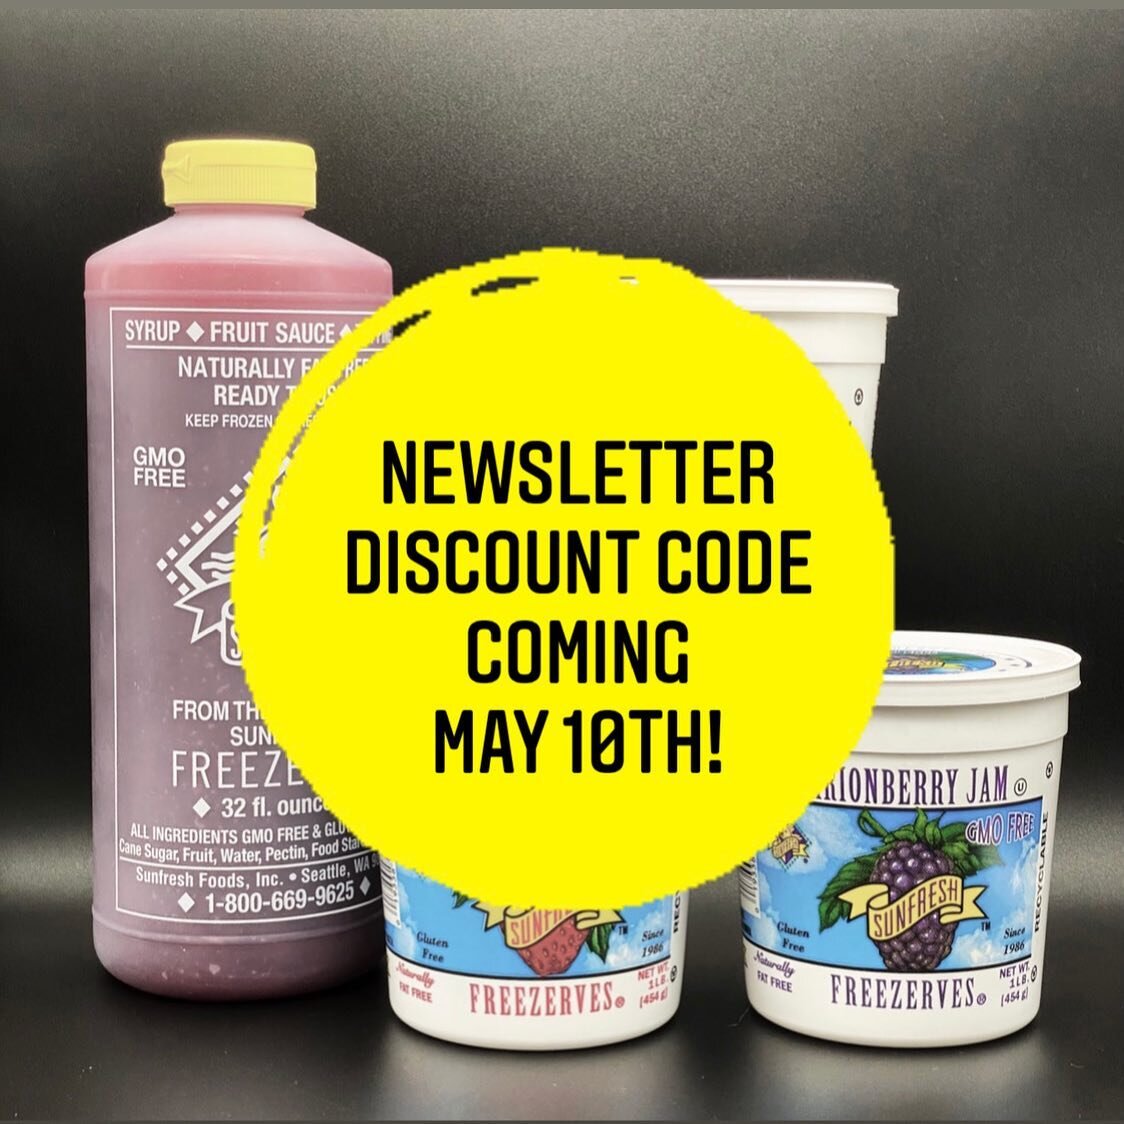 Happy Friday folks! Head over to our website (link in profile) and sign up for our newsletter. We are blasting out a discount code as well as sharing some information about Sunfresh Jams in your local grocery store!
☀️
#freezerjam #sunfreshfreezerves